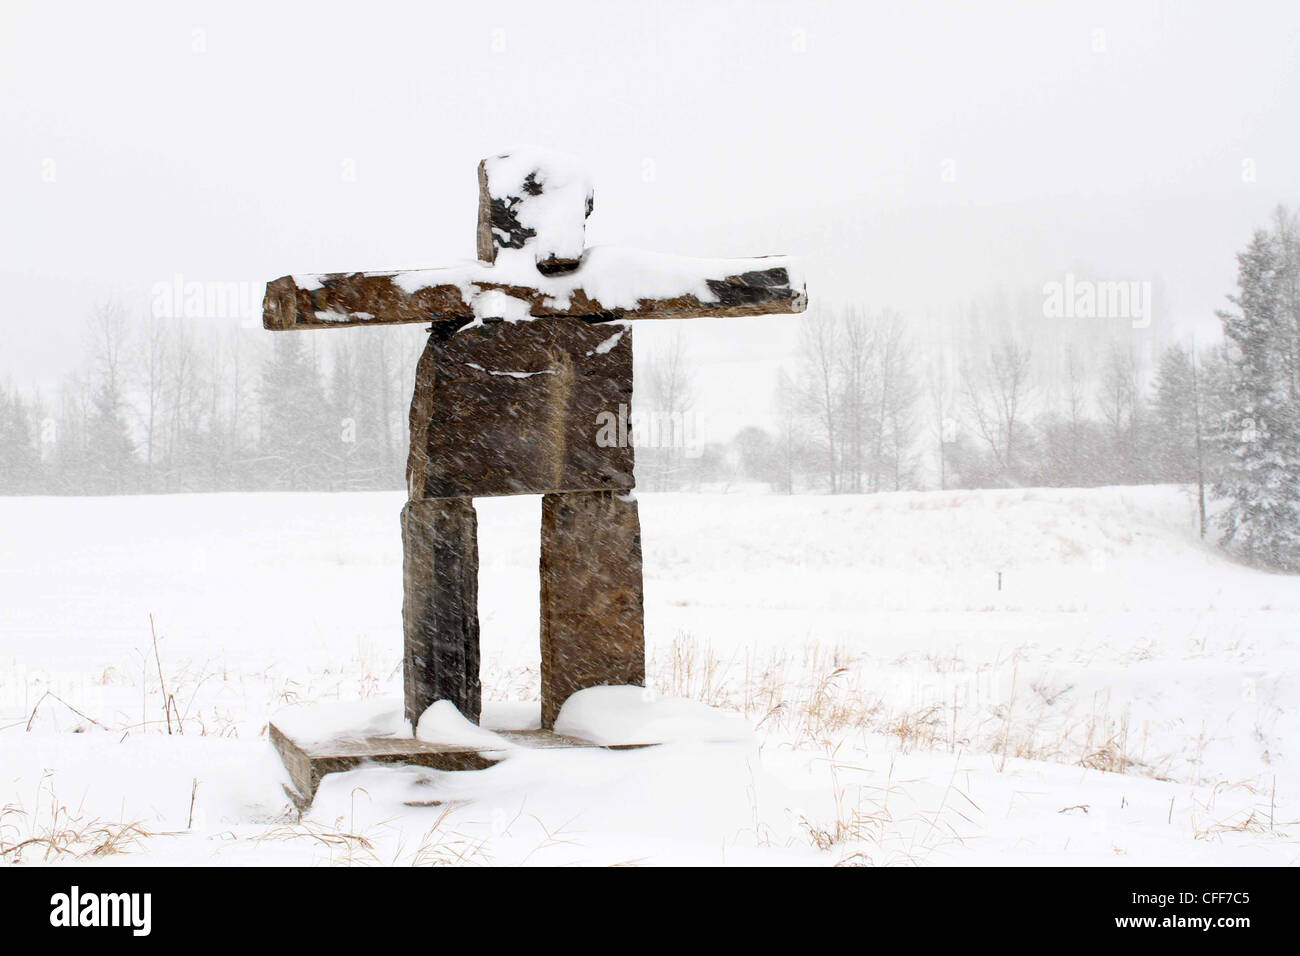 Inuksuit; figure made of stone meaning to act in the capacity of a human Stock Photo